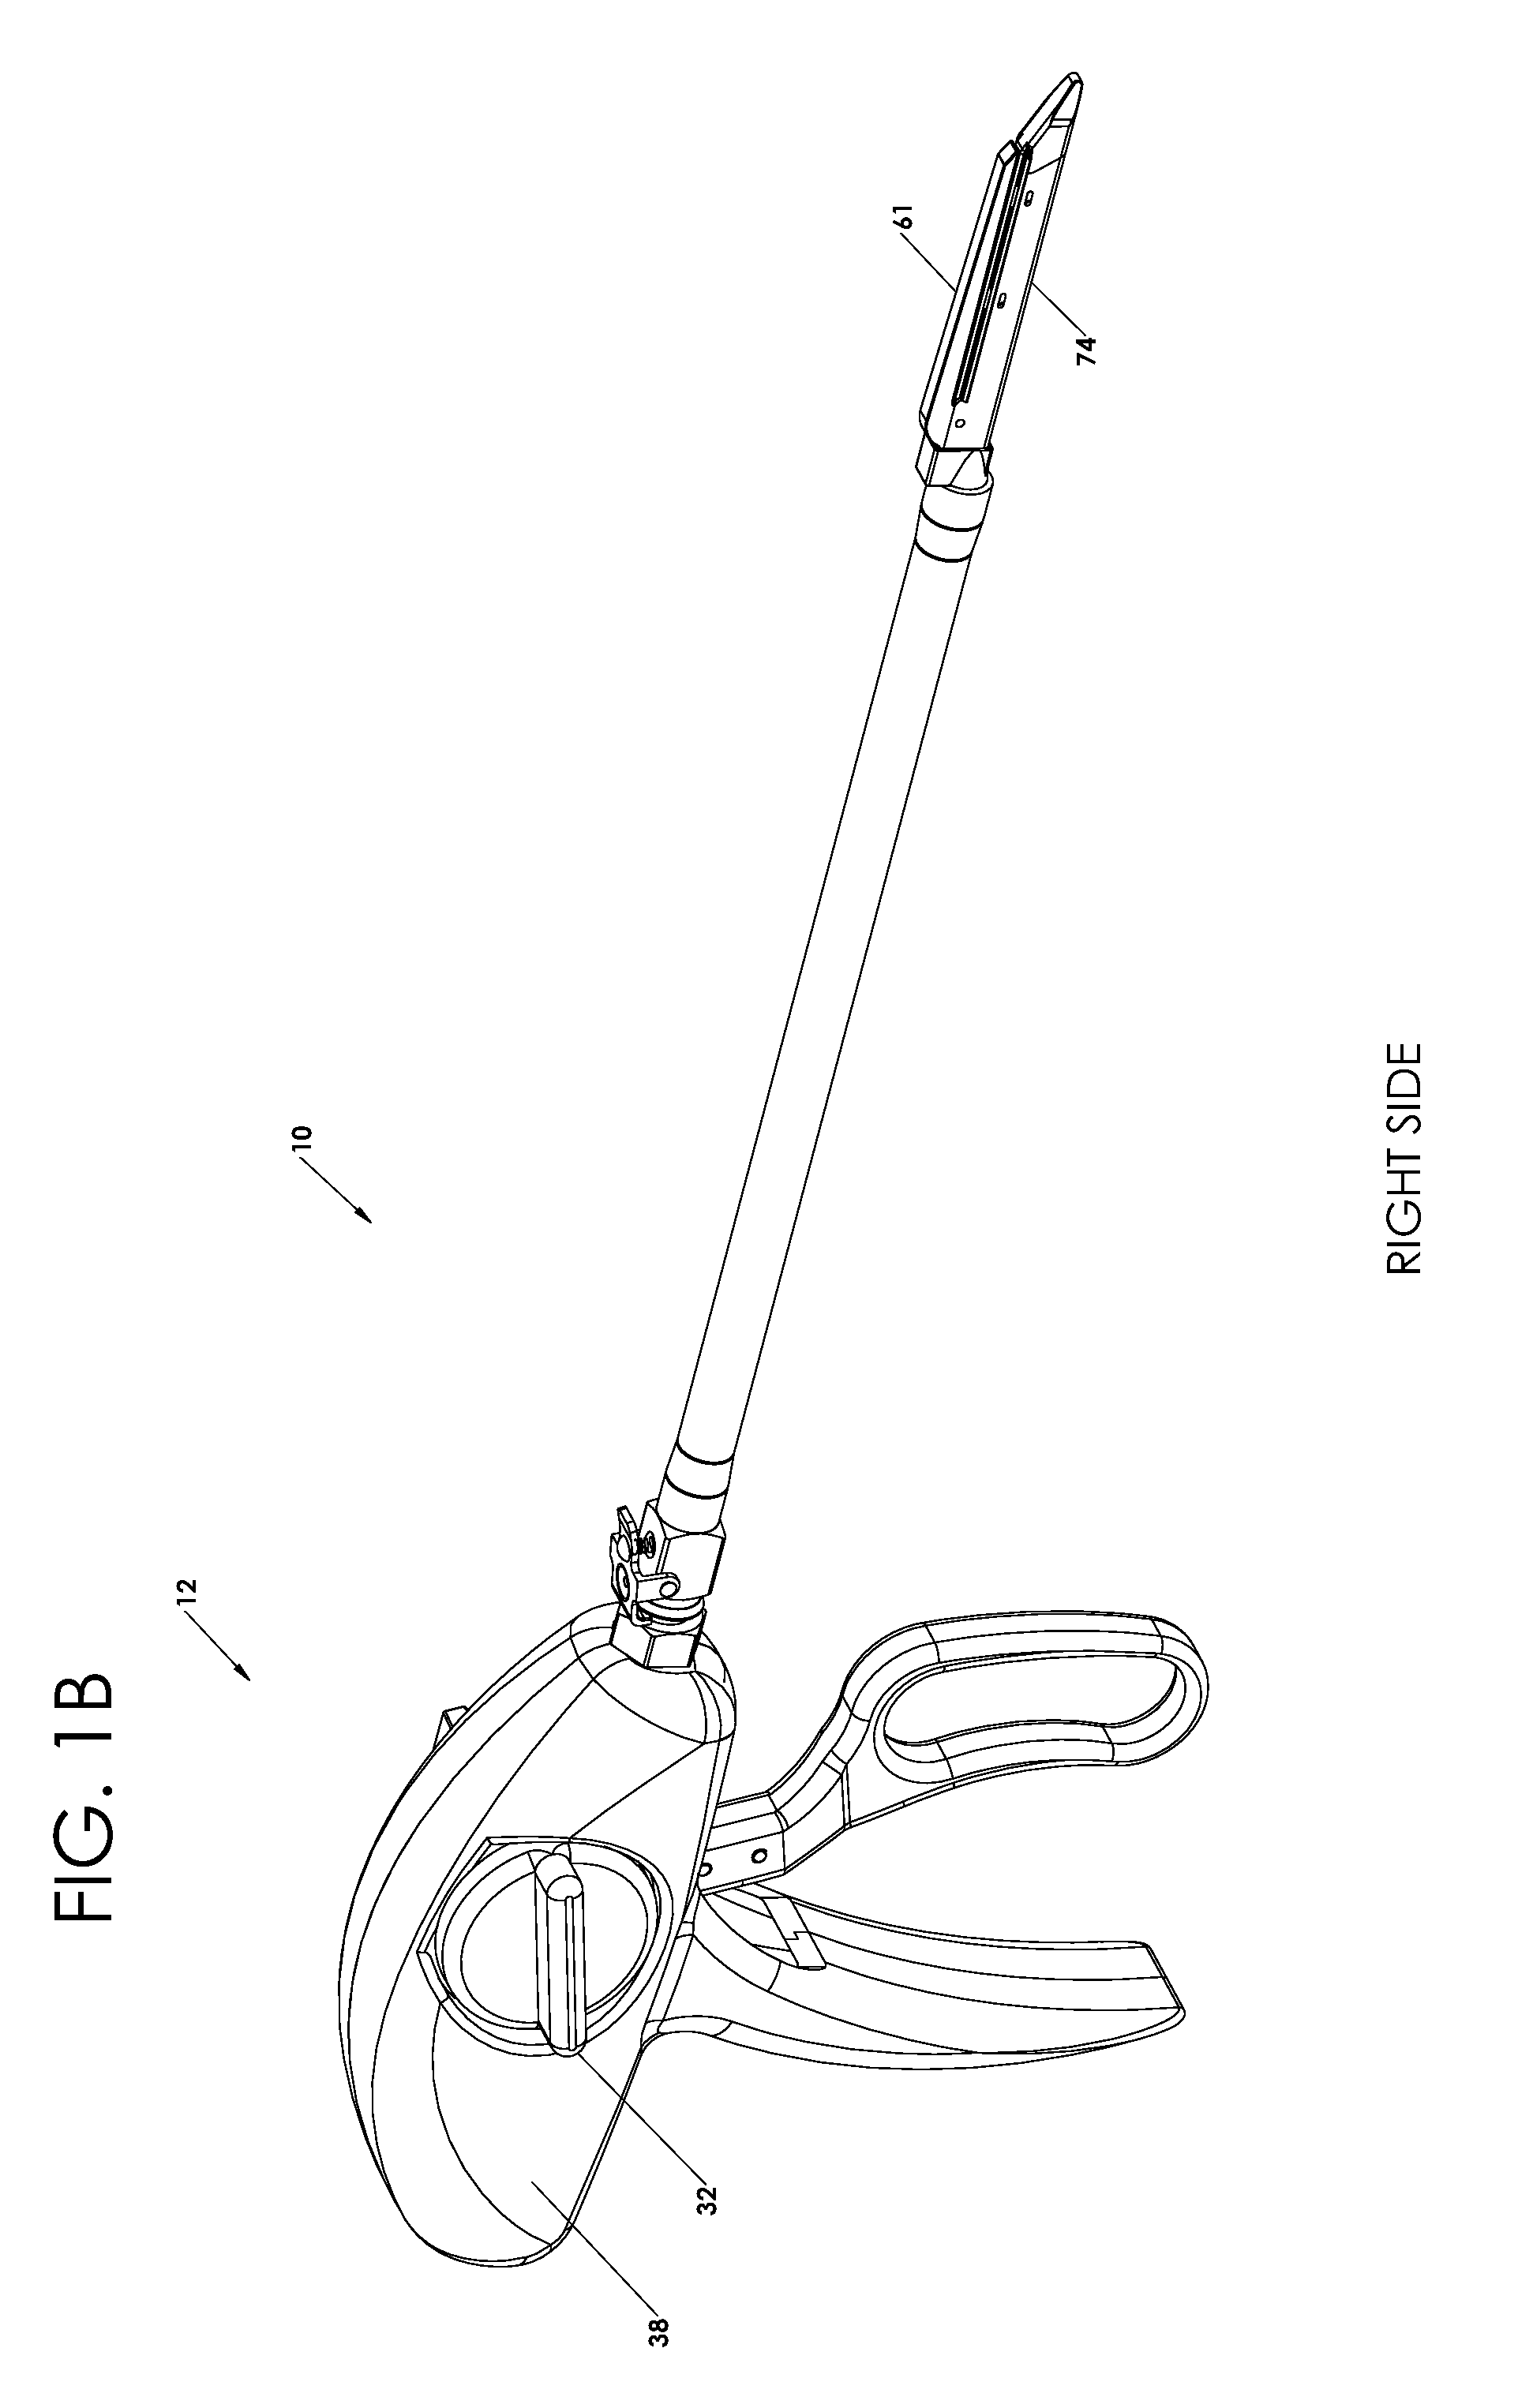 Delivery applicator for radioactive staples for brachytherapy medical treatment